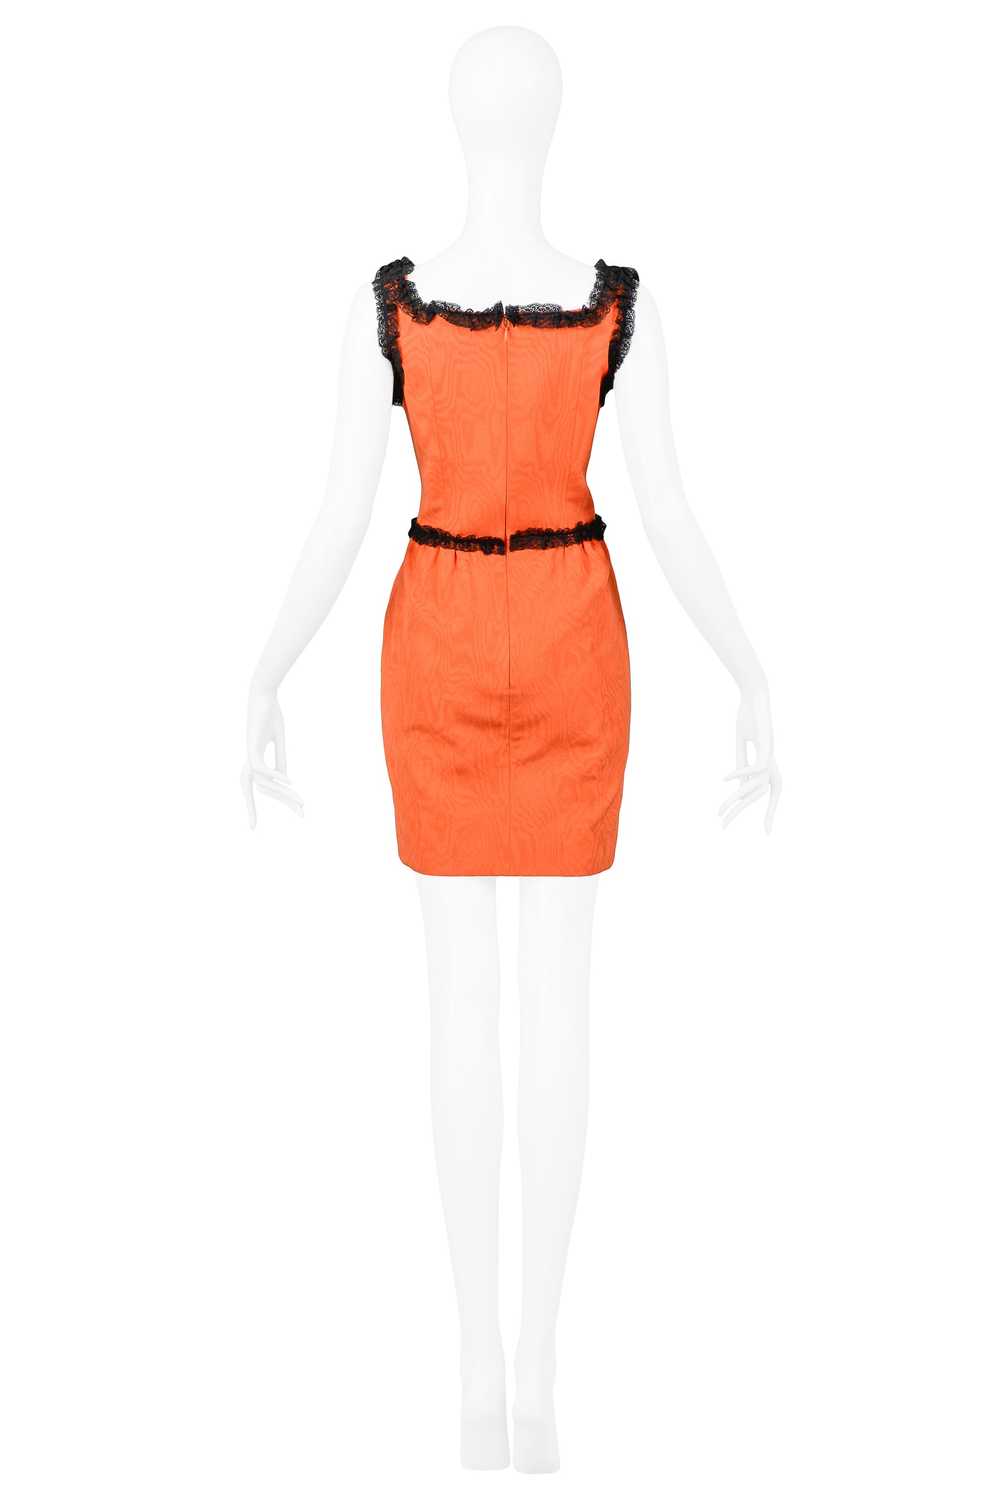 MOSCHINO COUTURE ORANGE QUILTED FAILLE WITH BLACK… - image 2